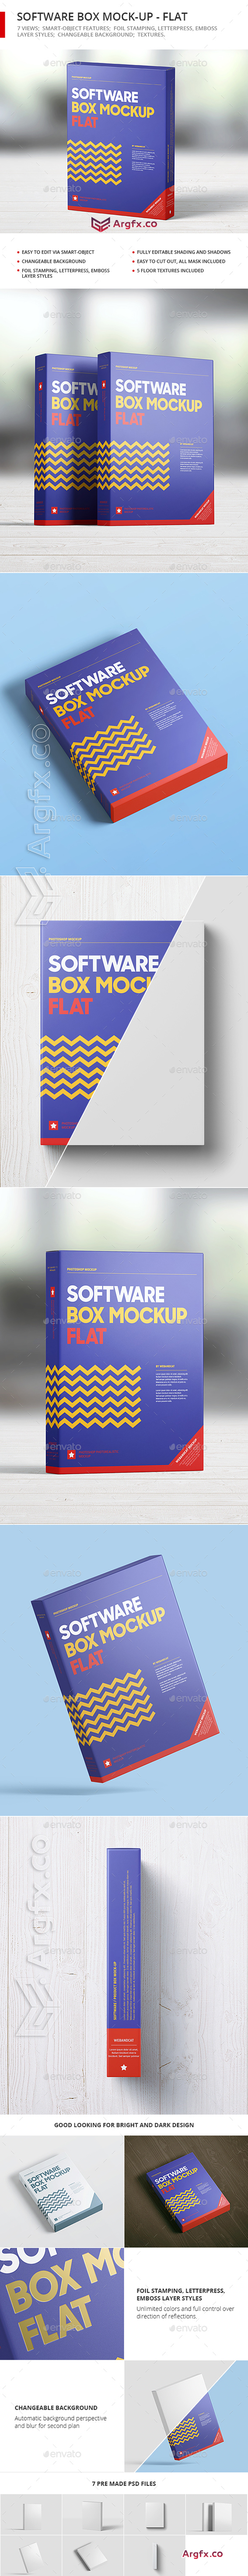  GraphicRiver - Software Box Mock-up - Flat 21262209